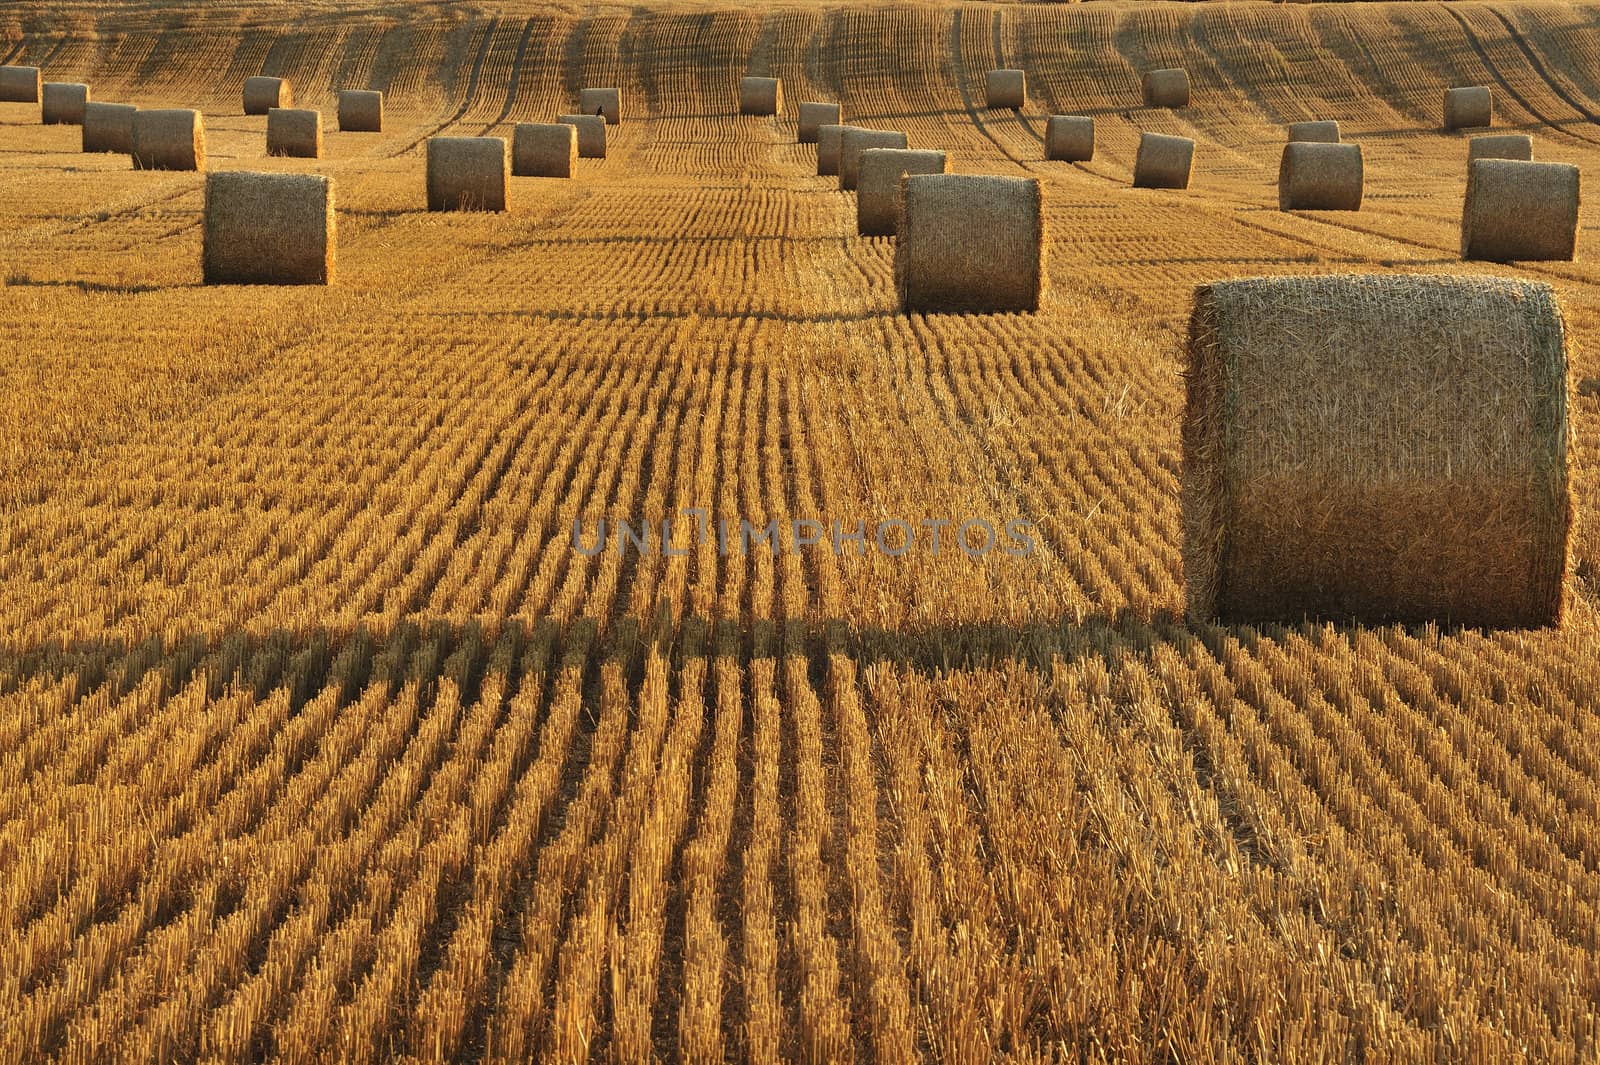 Harvested field by Bateleur